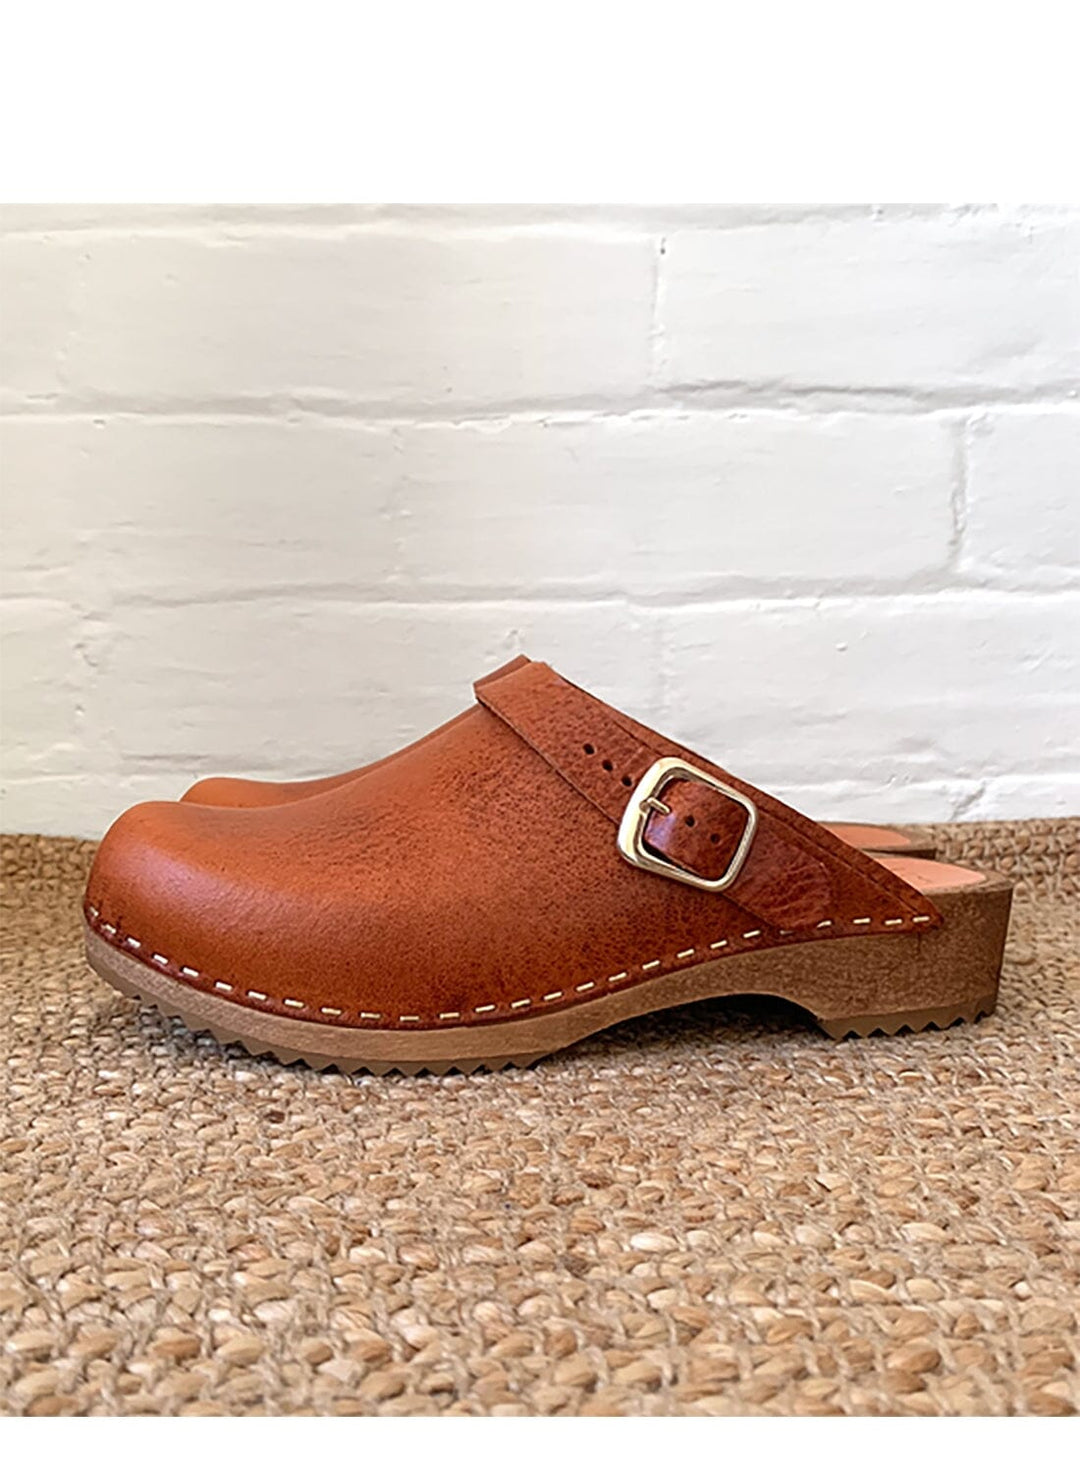 Low Klassisk Strap Clog in Cacao Shoes YBDFinds 